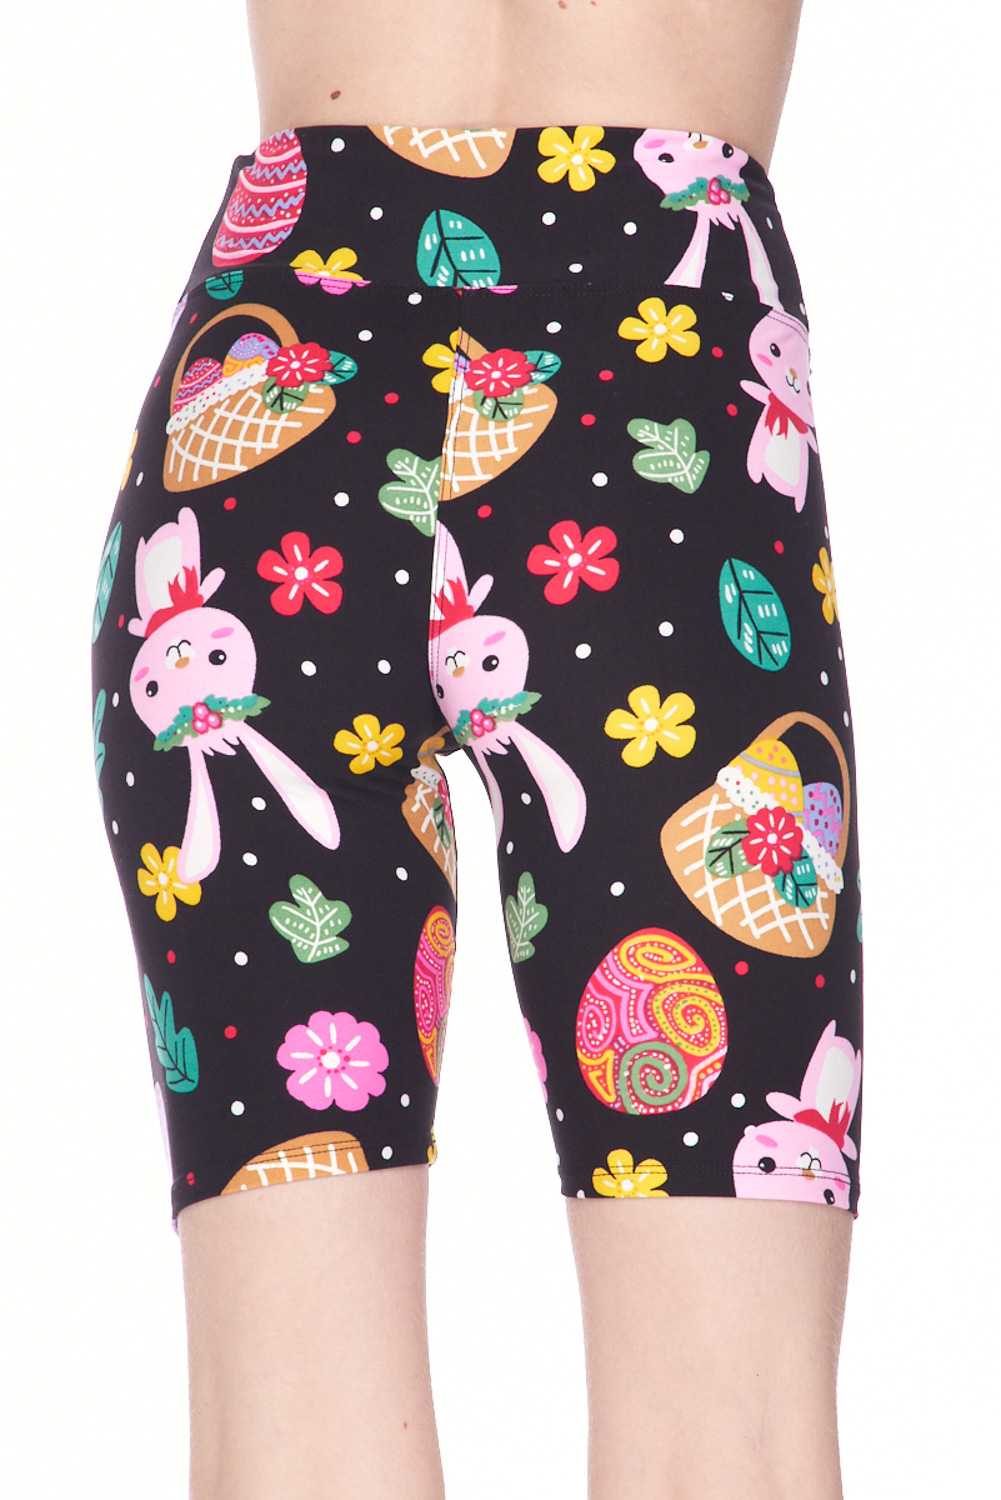 Wholesale Buttery Smooth Cute Bunnies and Easter Egg Shorts - 3 Inch